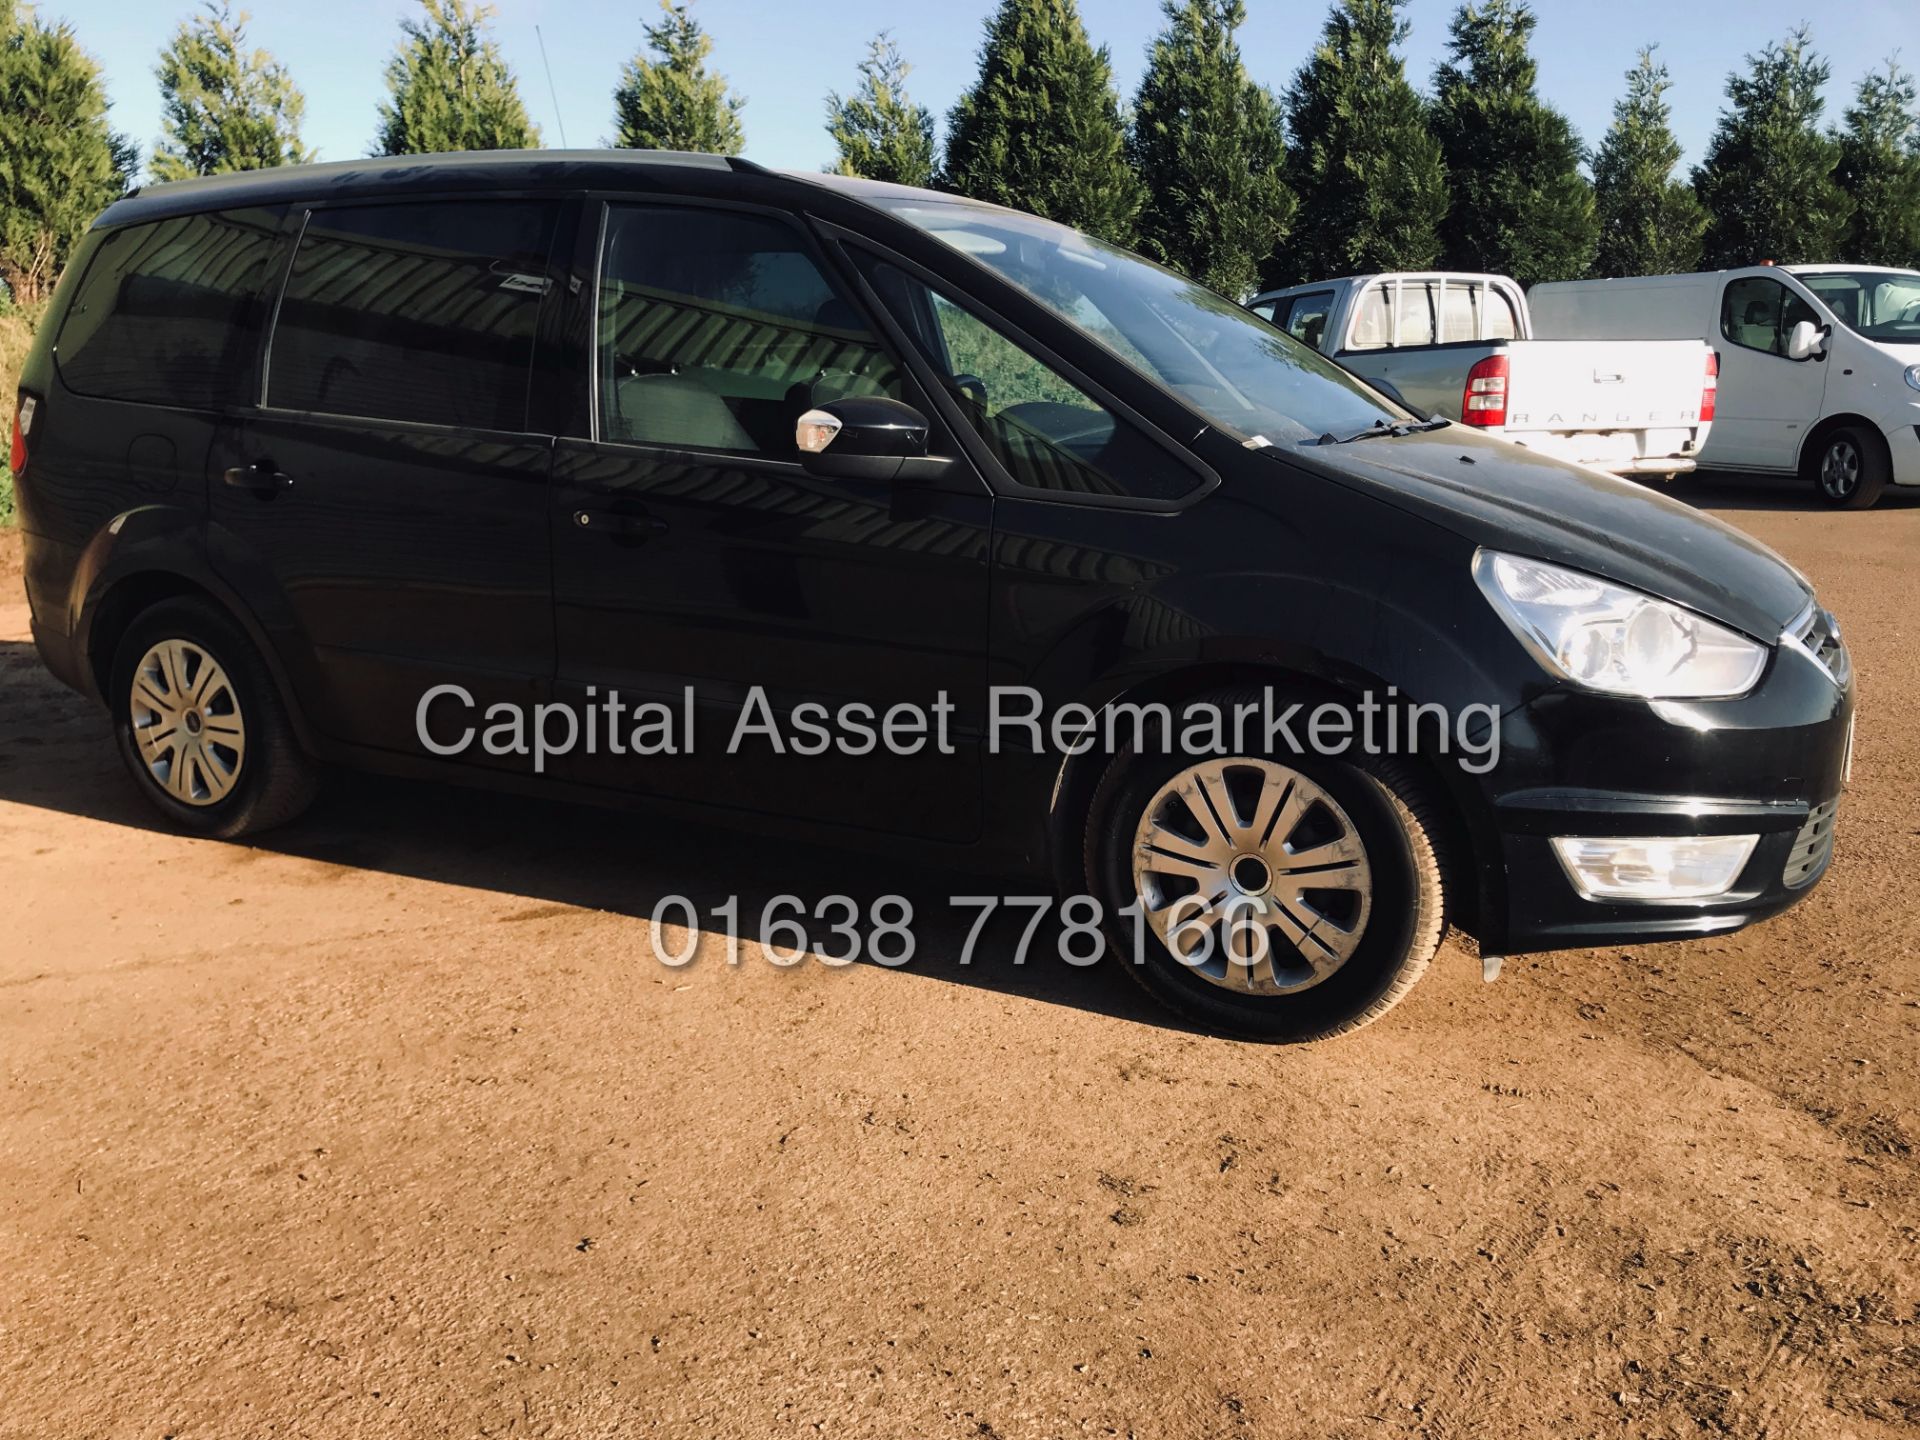 On Sale FORD GALAXY 2.0TDCI "ZETEC - POWERSHIFT" 7 SEATER (15 REG) AIR CON - 1 OWNER - 140BHP ENGINE - Image 5 of 17